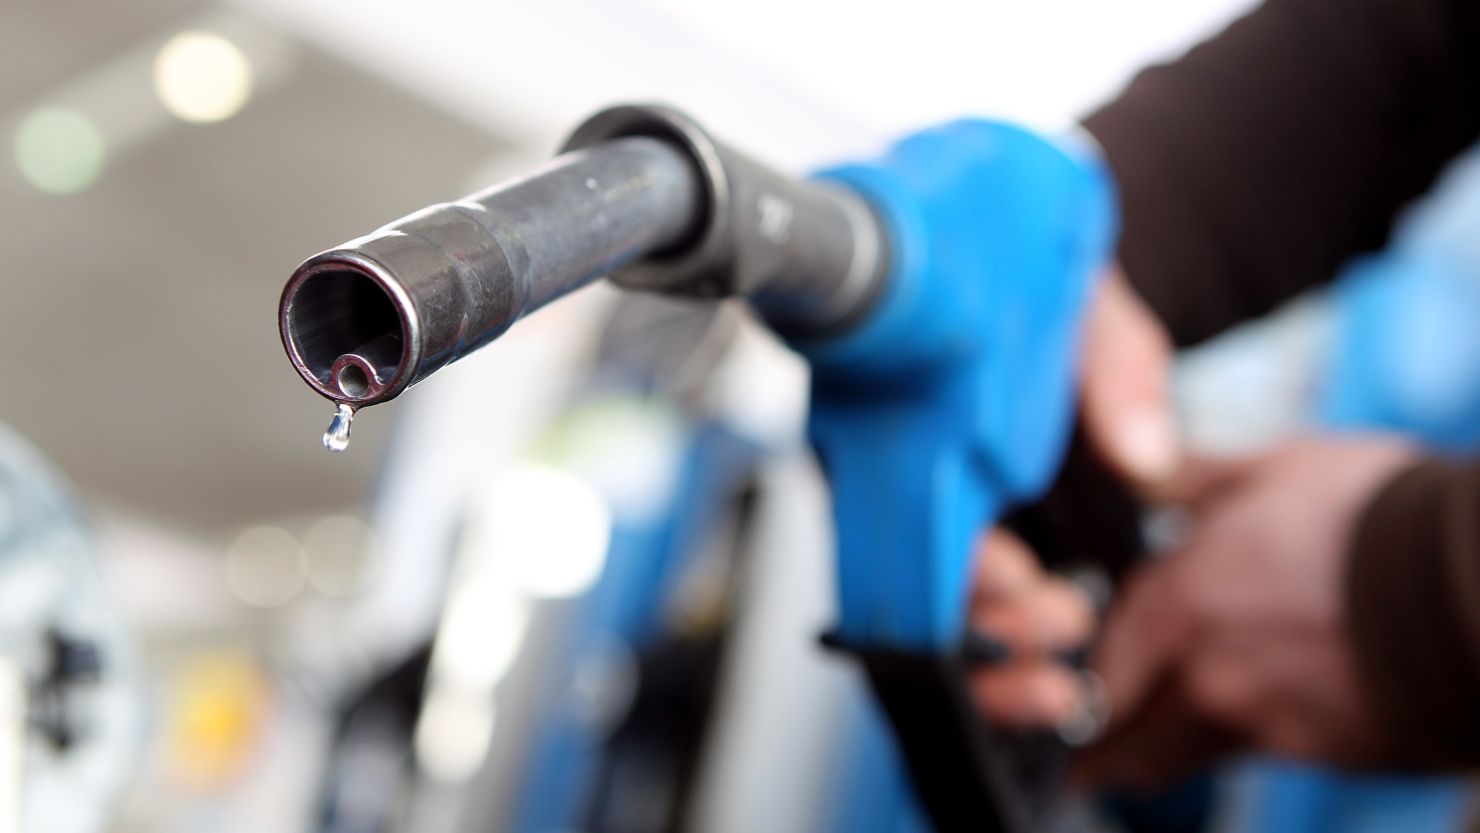 The average price of gas in the U.S. has climbed 36 cents per gallon over the past year. 